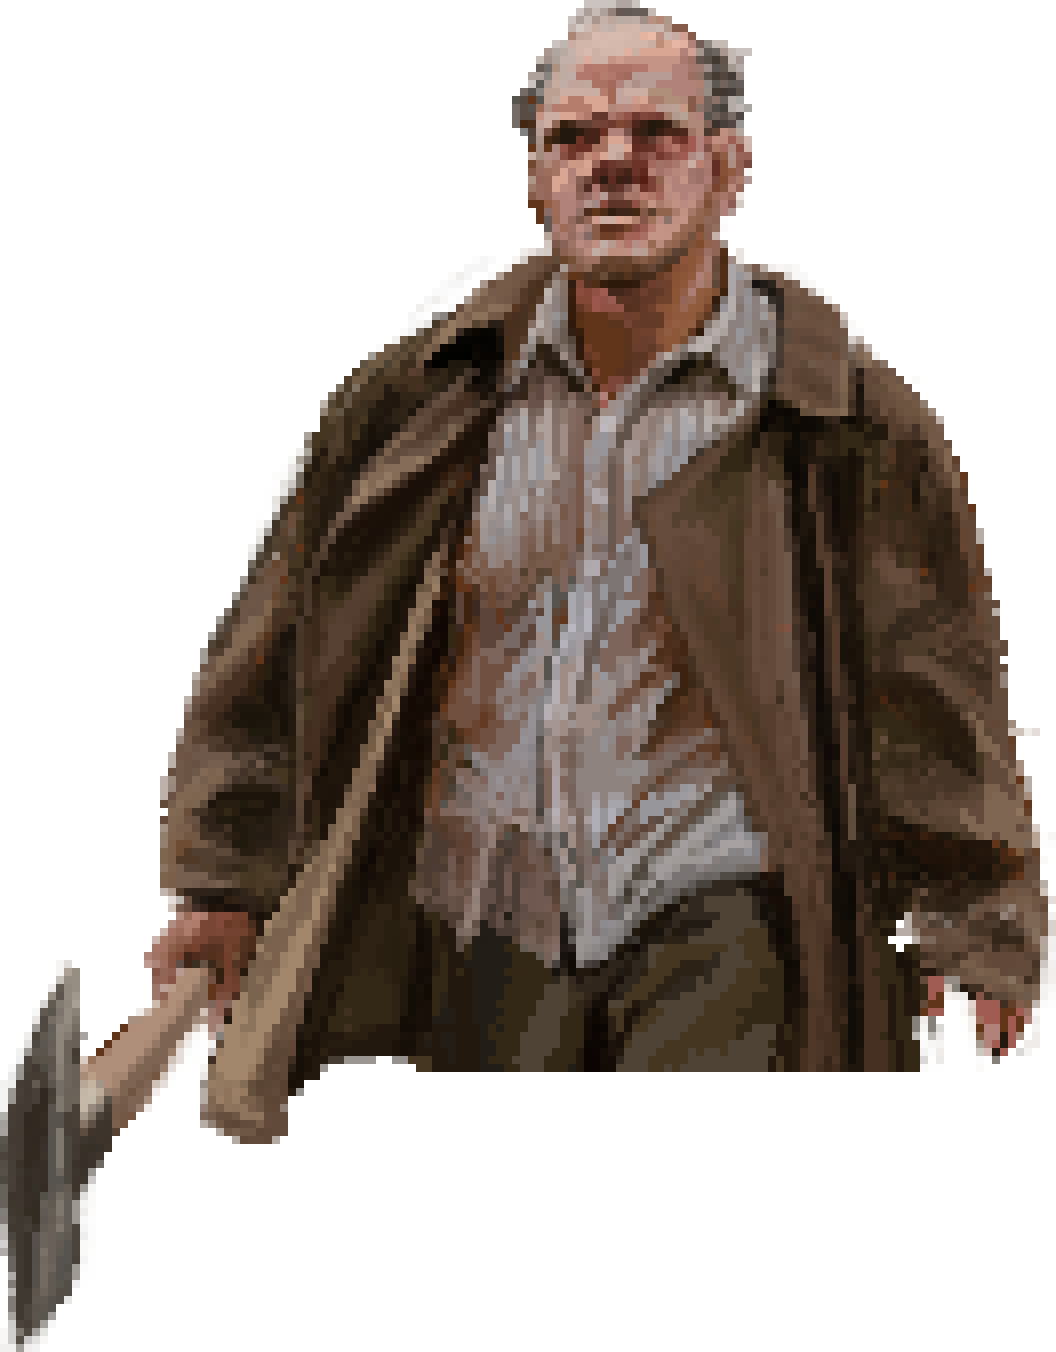 Pixel art drawing of a light-skinned man who is balding with gray hair, wearing a brown long coat, a blood-stained collared shirt, and gray-green slacks. He has red ringing his eyes, and he is holding an axe